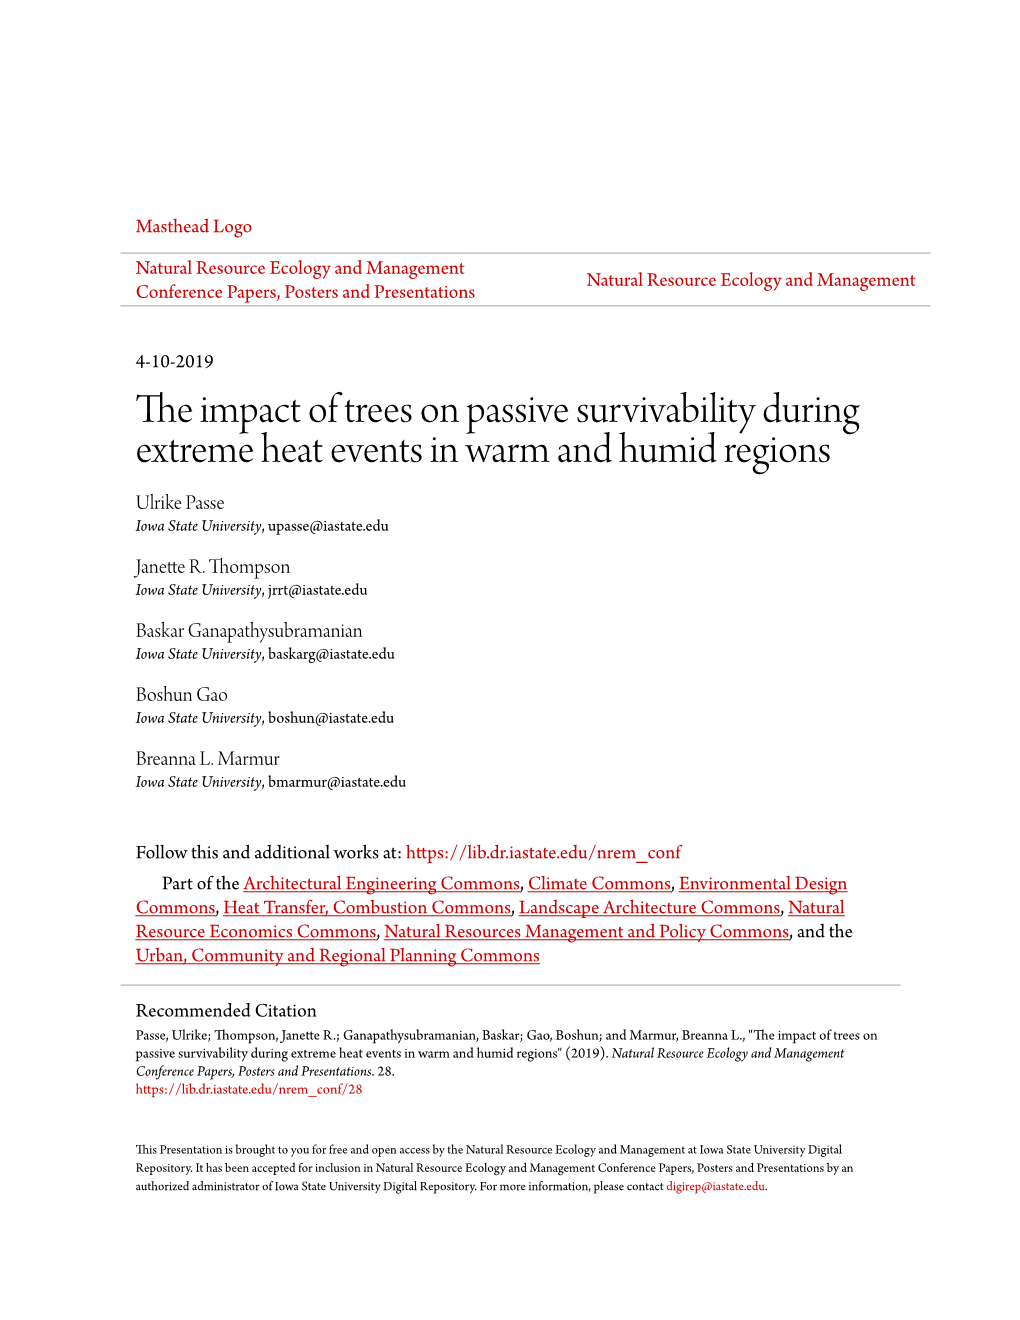 The Impact of Trees on Passive Survivability During Extreme Heat Events in Warm and Humid Regions Ulrike Passe Iowa State University, Upasse@Iastate.Edu